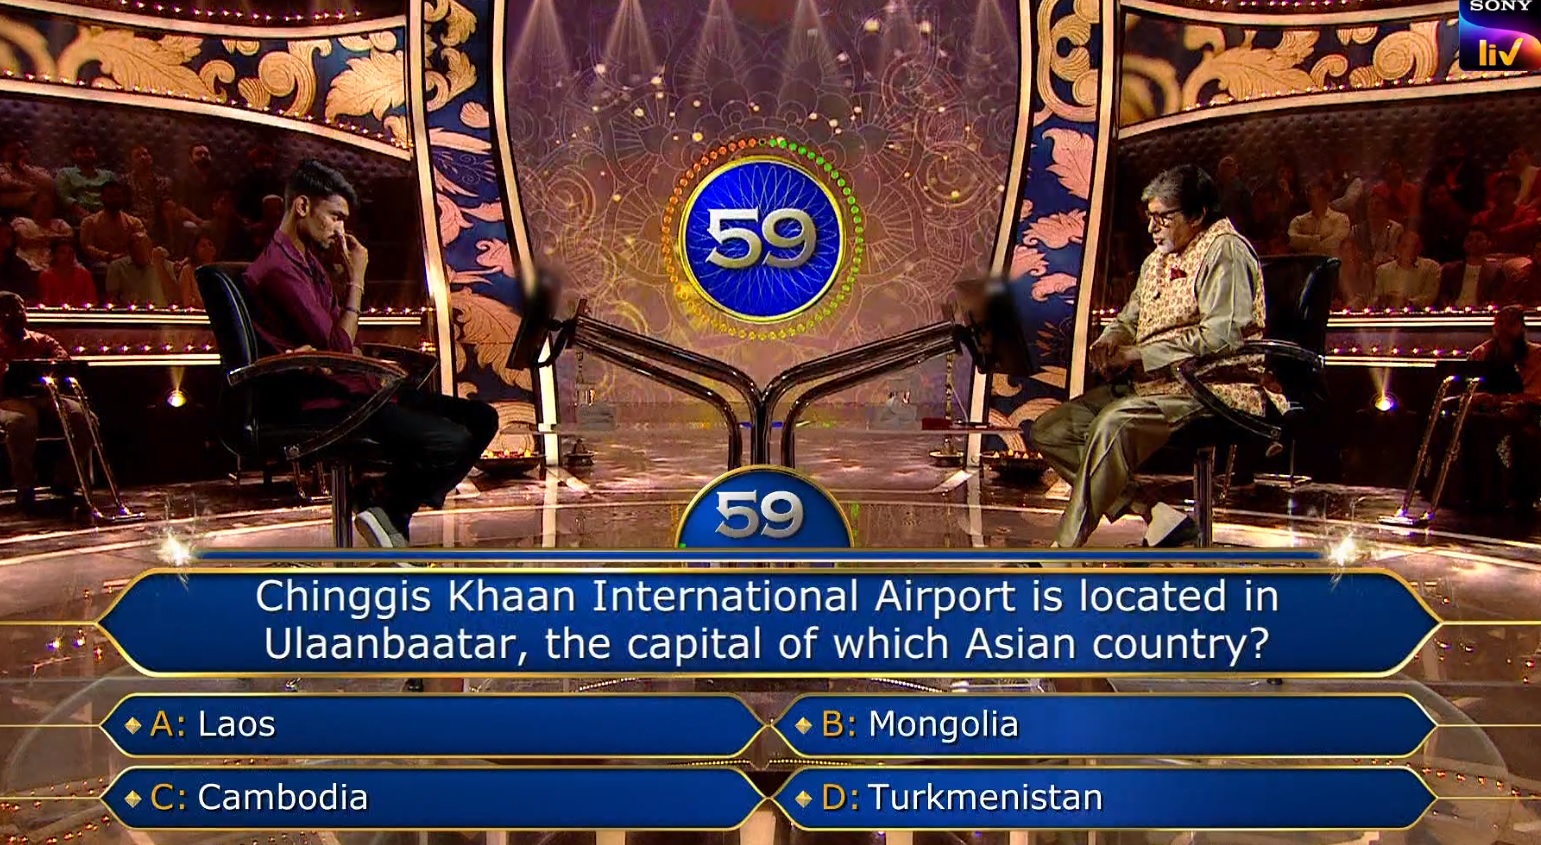 Ques : Chinggis Khaan International Airport is located in Ulaanbaatar, the capital of which Asian country?